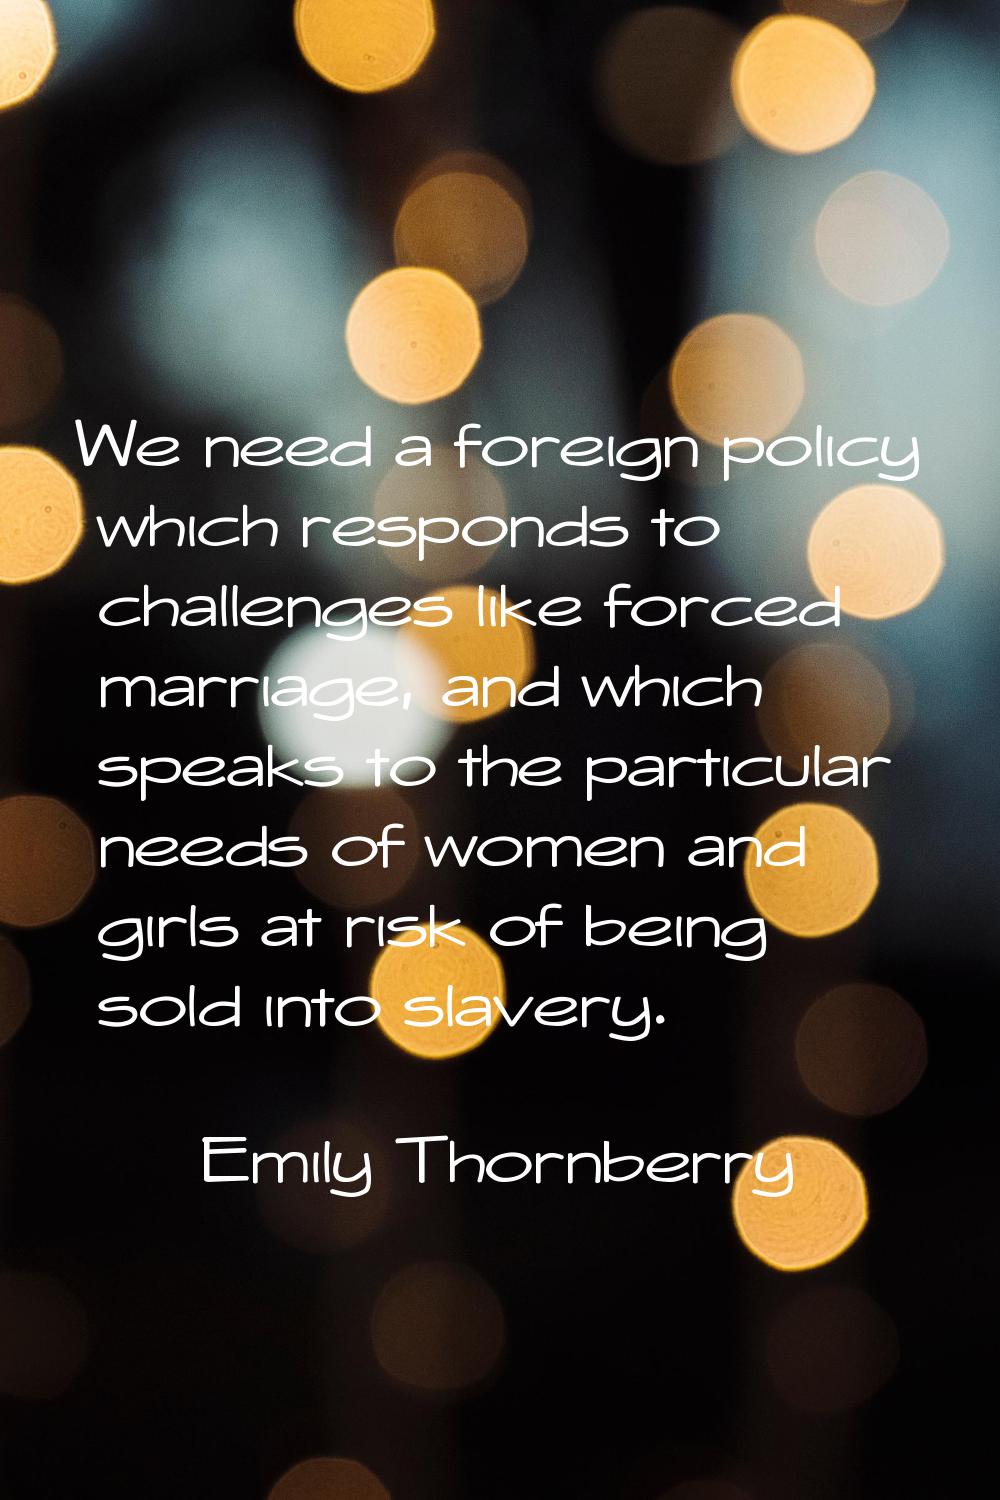 We need a foreign policy which responds to challenges like forced marriage, and which speaks to the